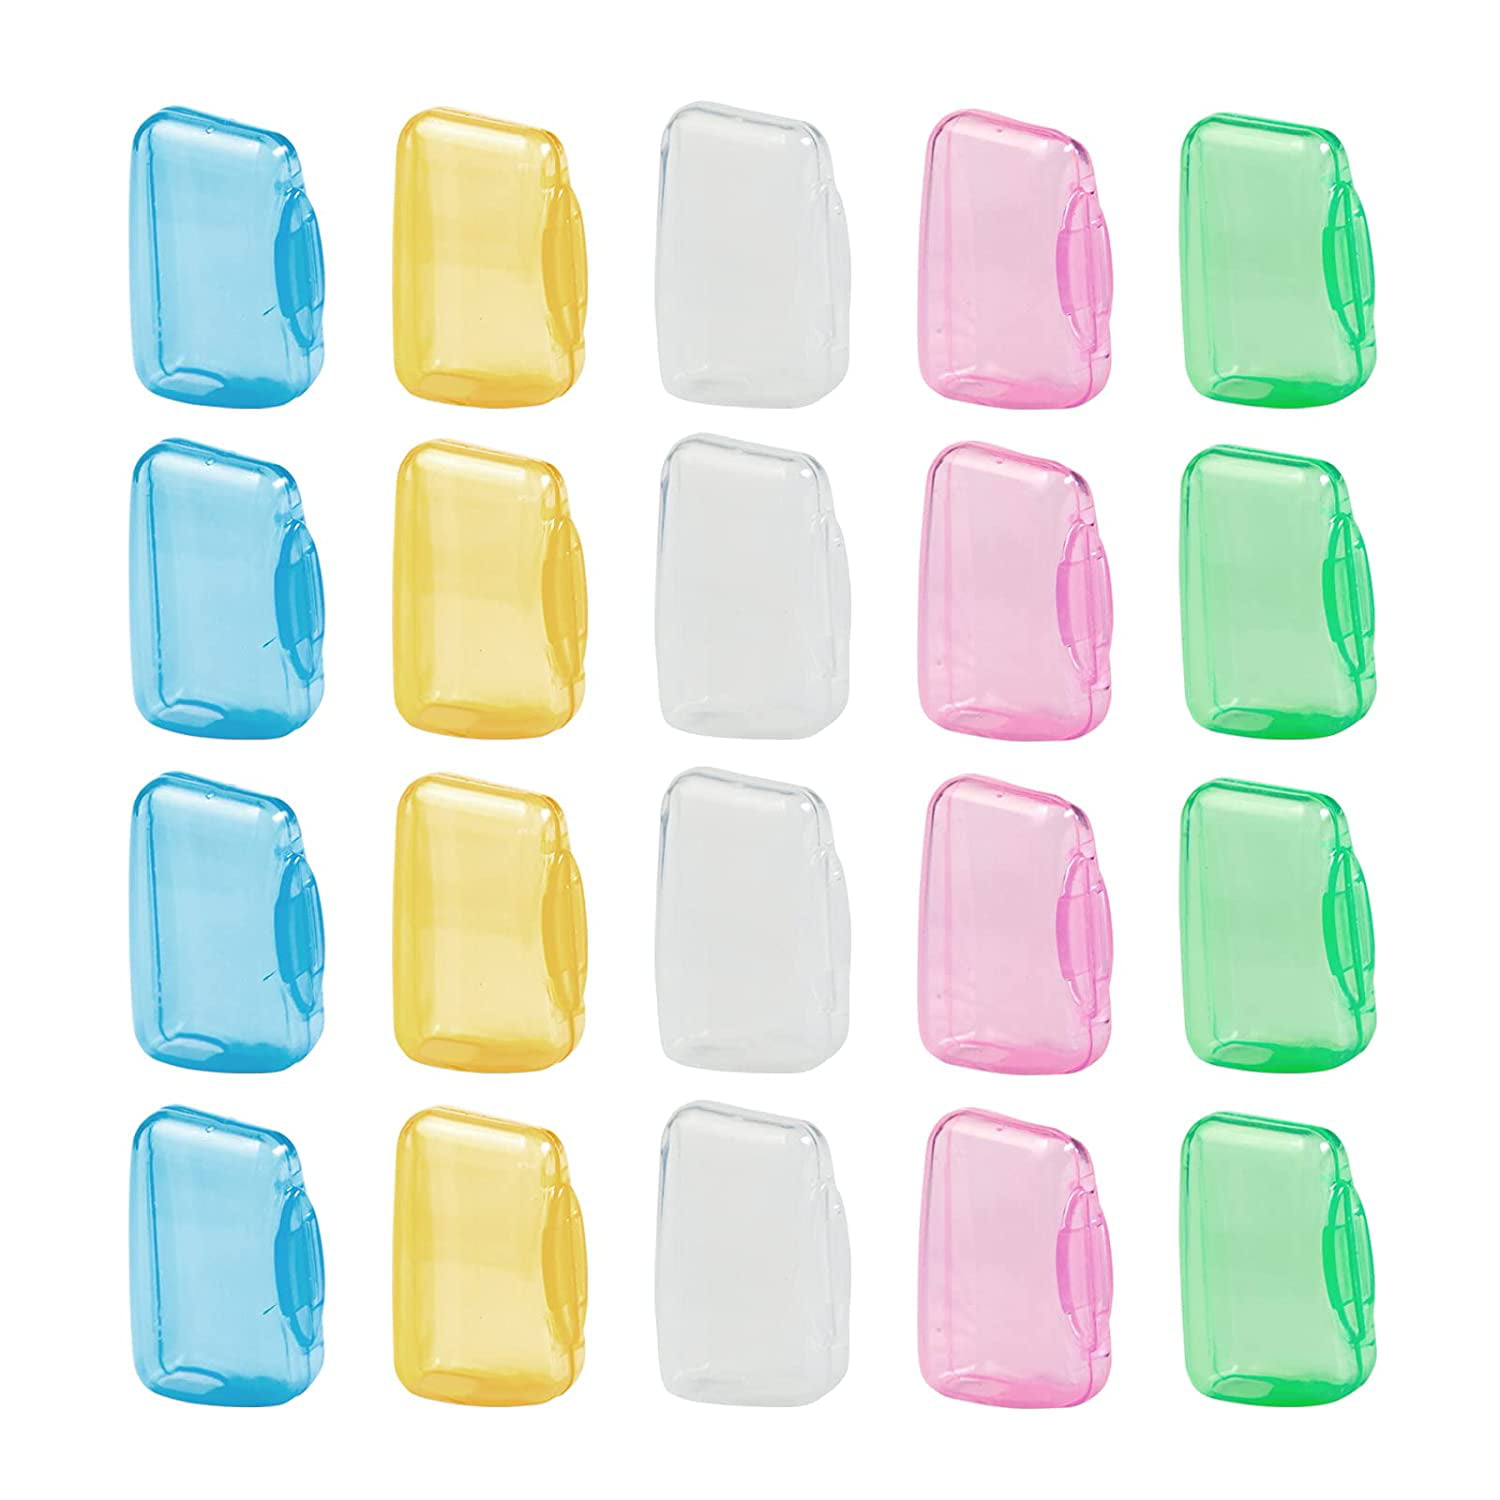 20Pcs Portable Toothbrush Head Case Covers Travel Camping Holder Brush Cap Case 